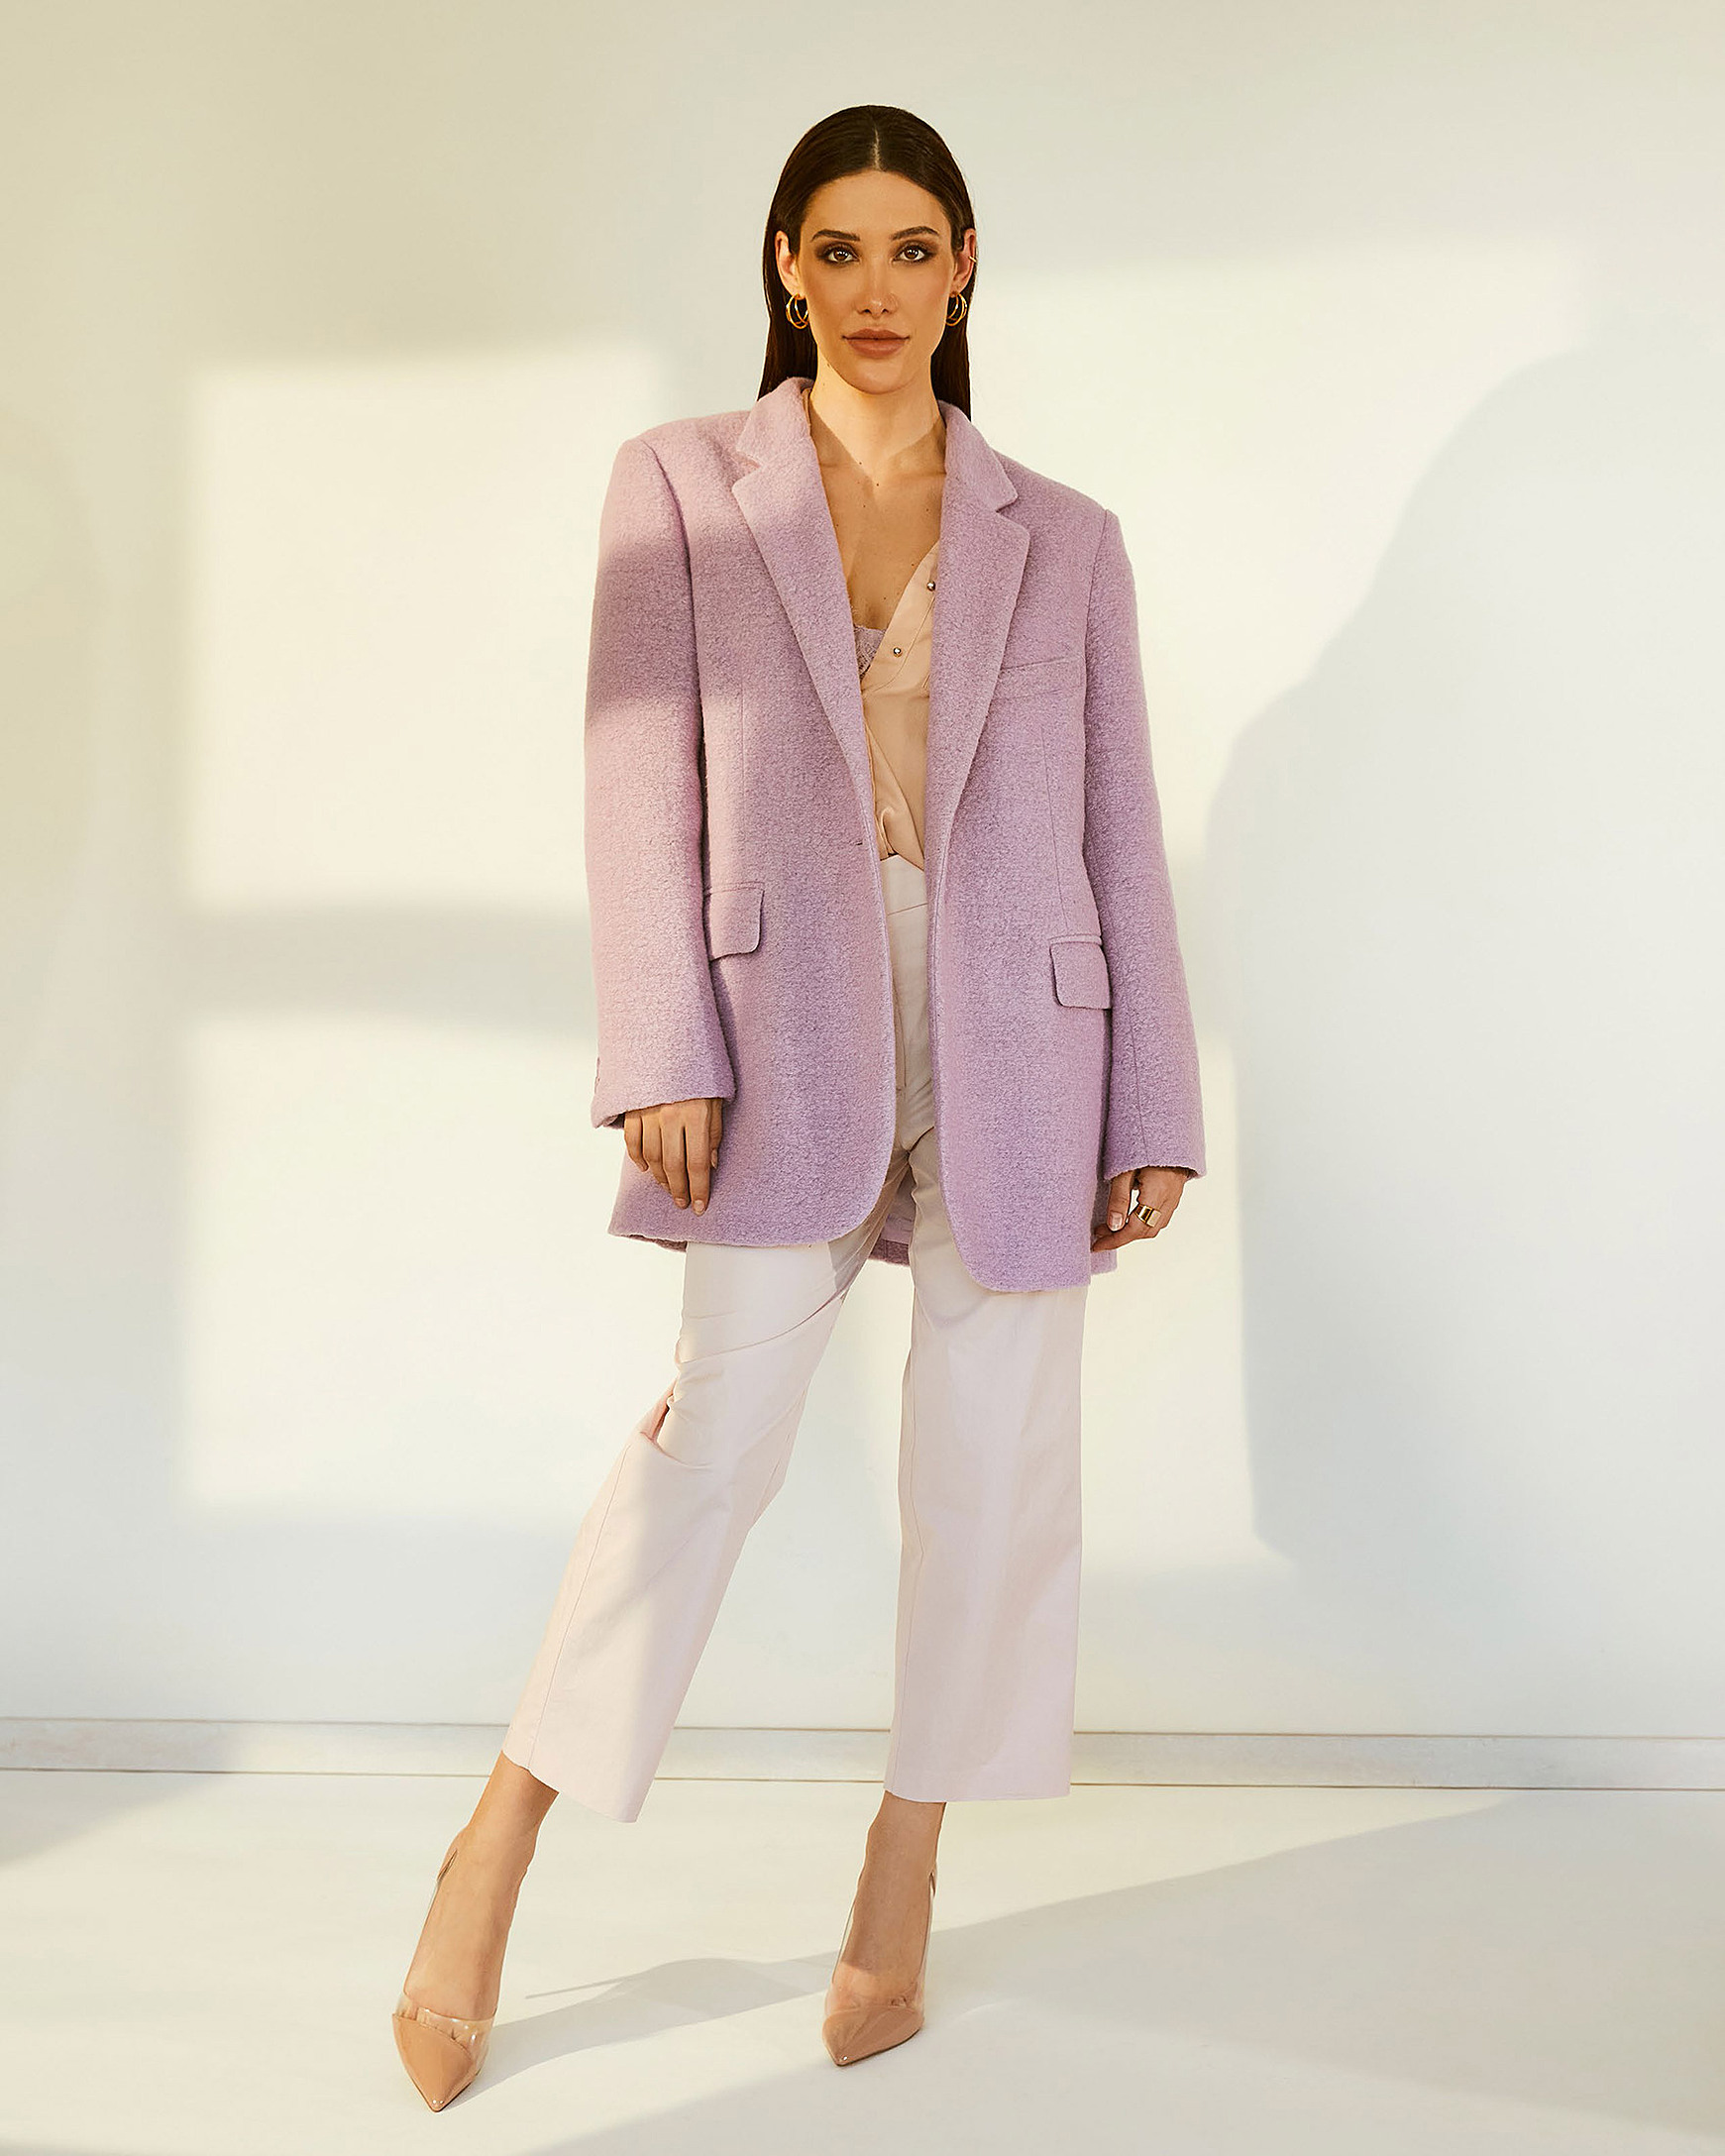 A female model stands in the light of the windows in the lilac coat